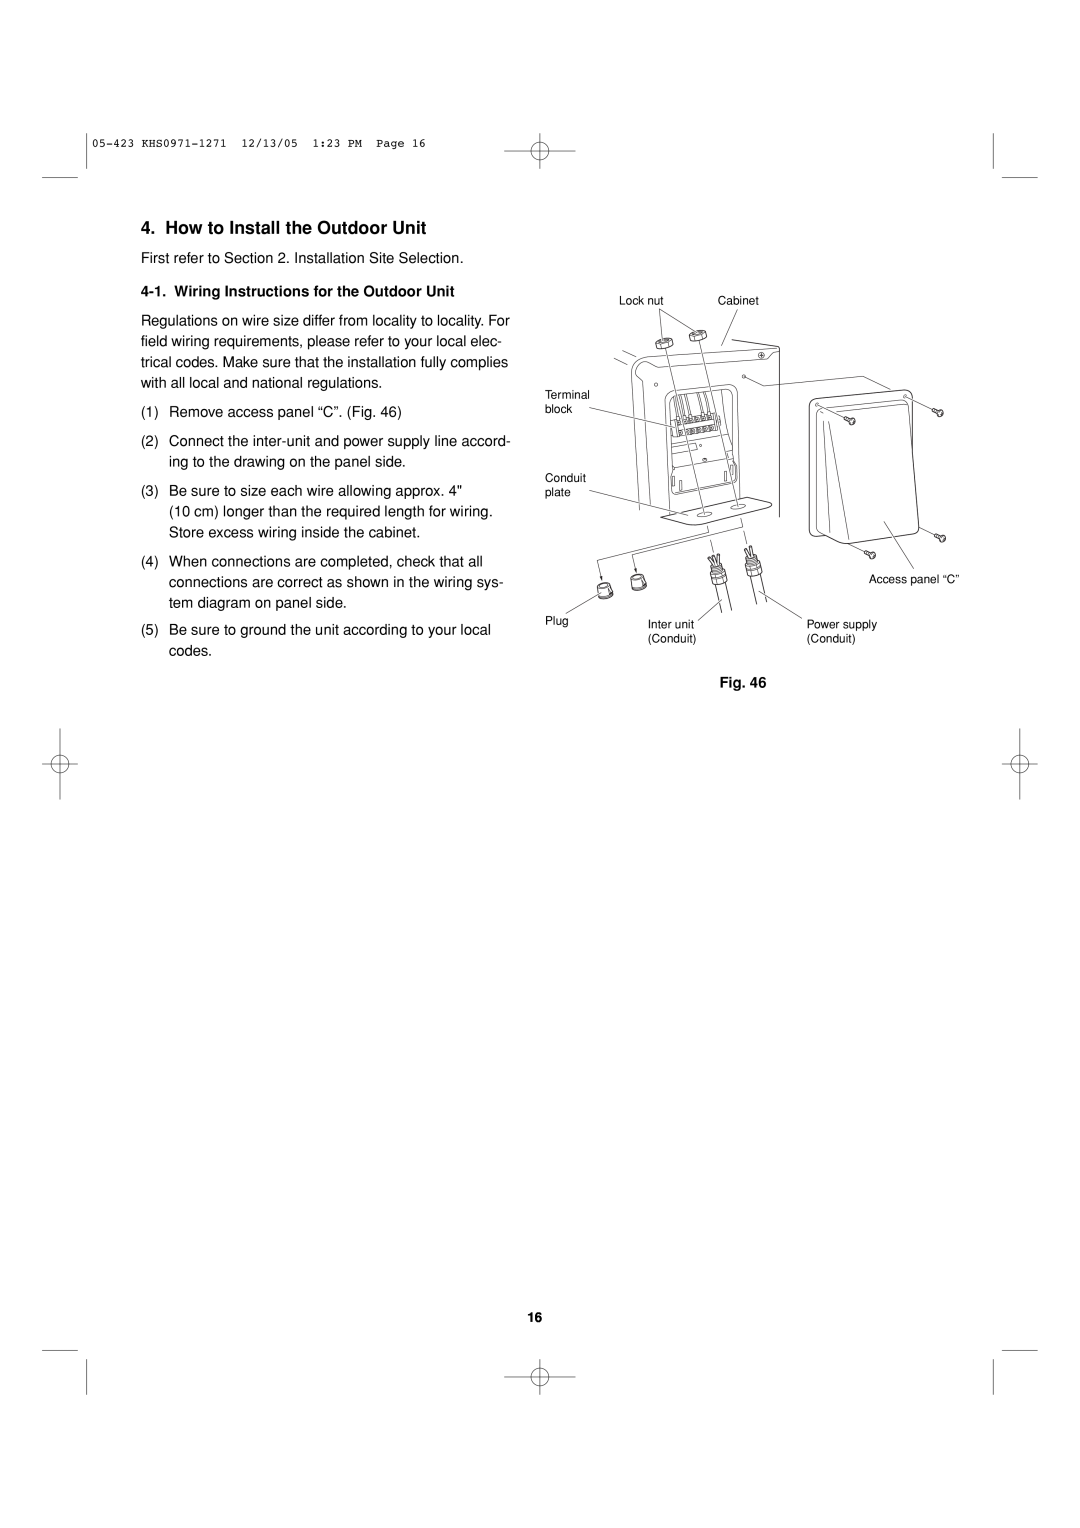 Sanyo 8.53E+13 installation instructions How to Install the Outdoor Unit, Wiring Instructions for the Outdoor Unit 